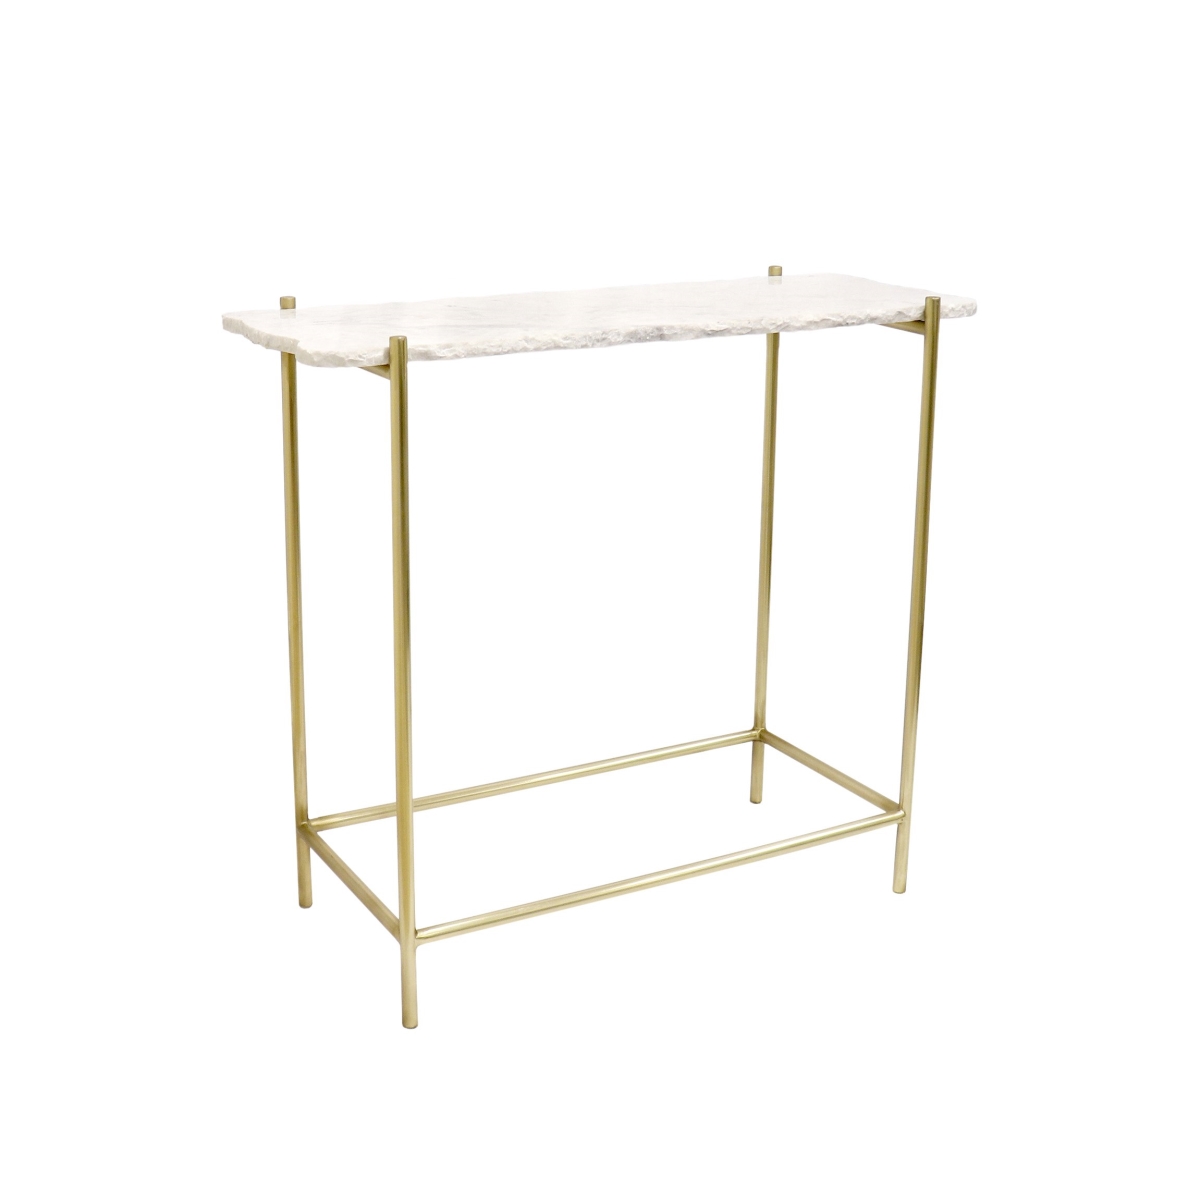 Psaf-143 Vasto Console Table, Stainless Steel Base With Marble Top